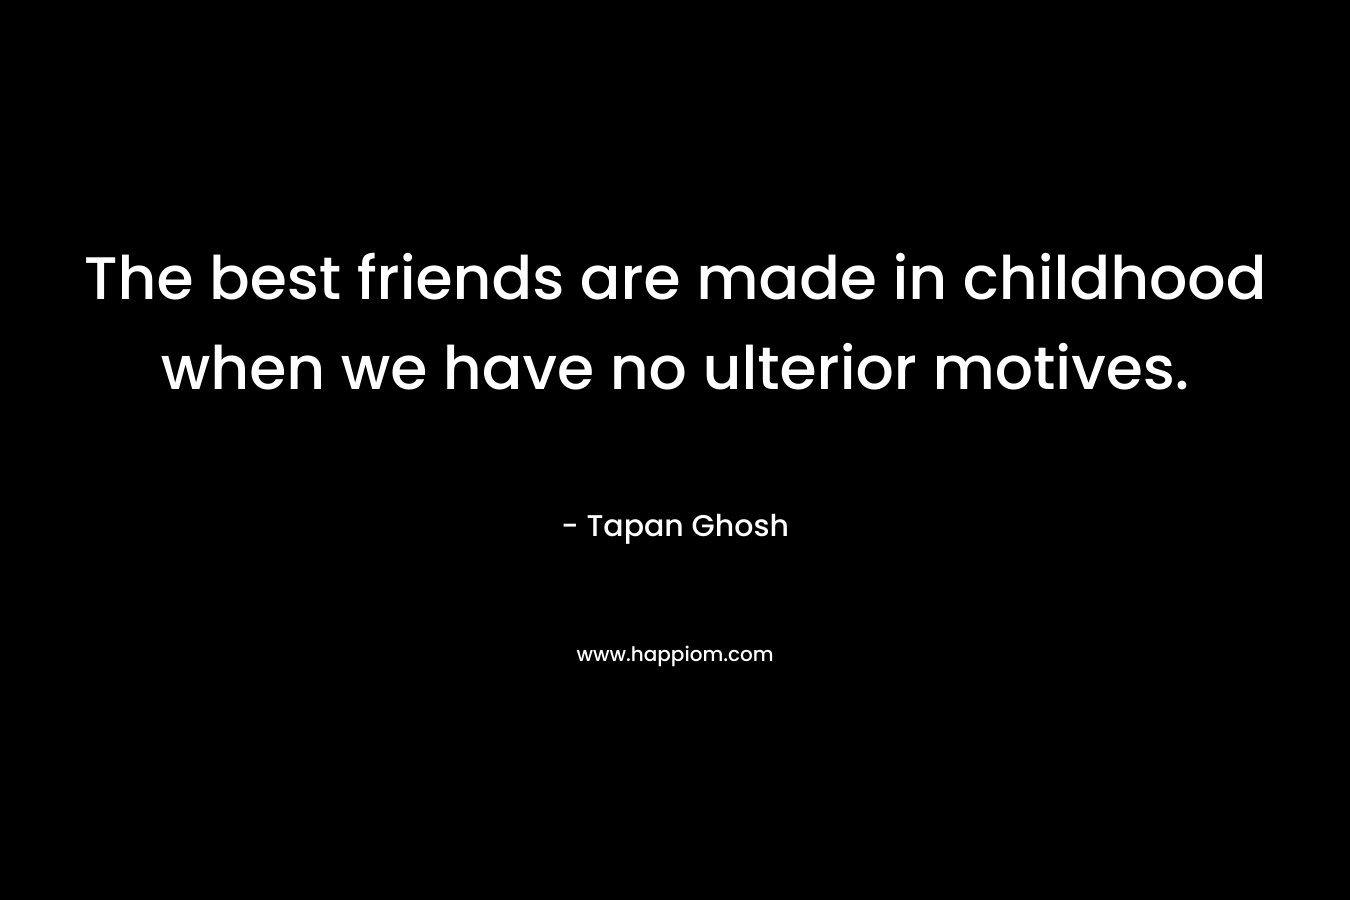 The best friends are made in childhood when we have no ulterior motives.